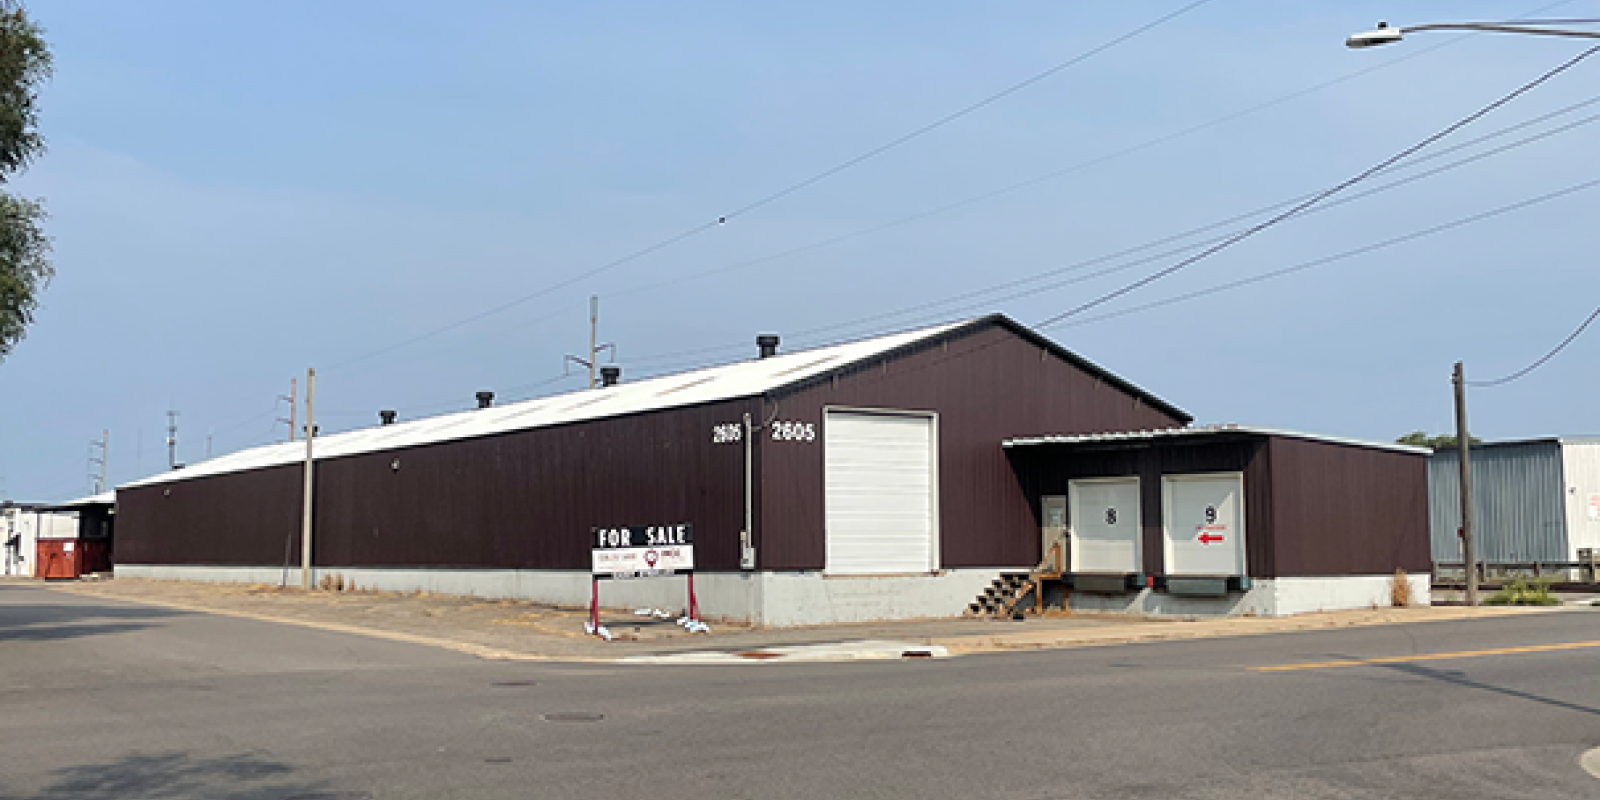 North St. Cloud Industrial Property For Sale and For Lease St. Cloud, MN